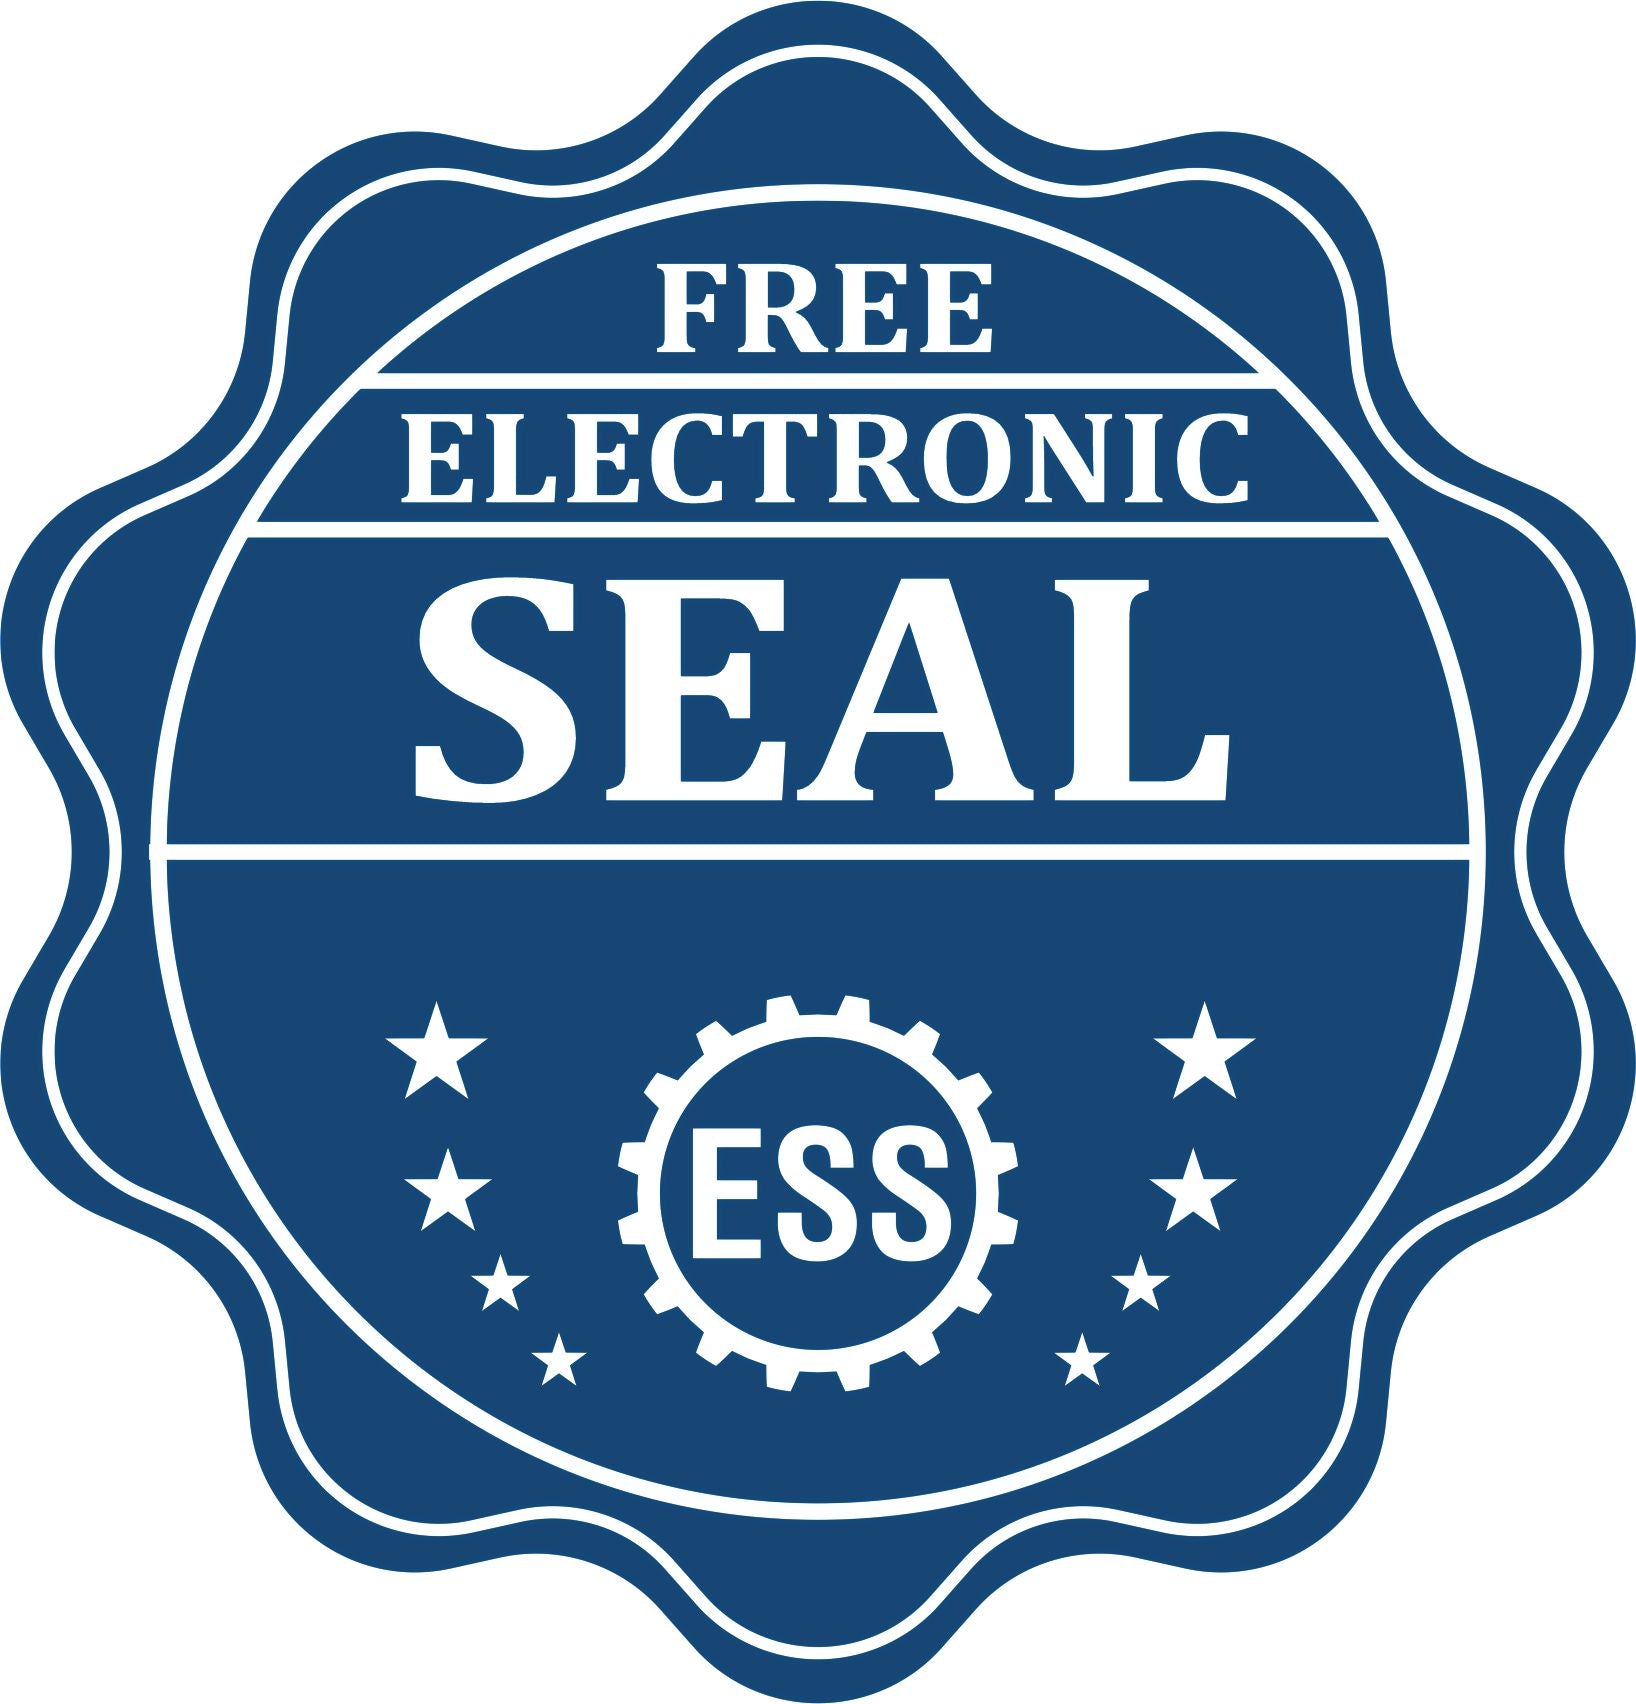 A badge showing a free electronic seal for the Slim Pre-Inked Minnesota Professional Engineer Seal Stamp with stars and the ESS gear on the emblem.